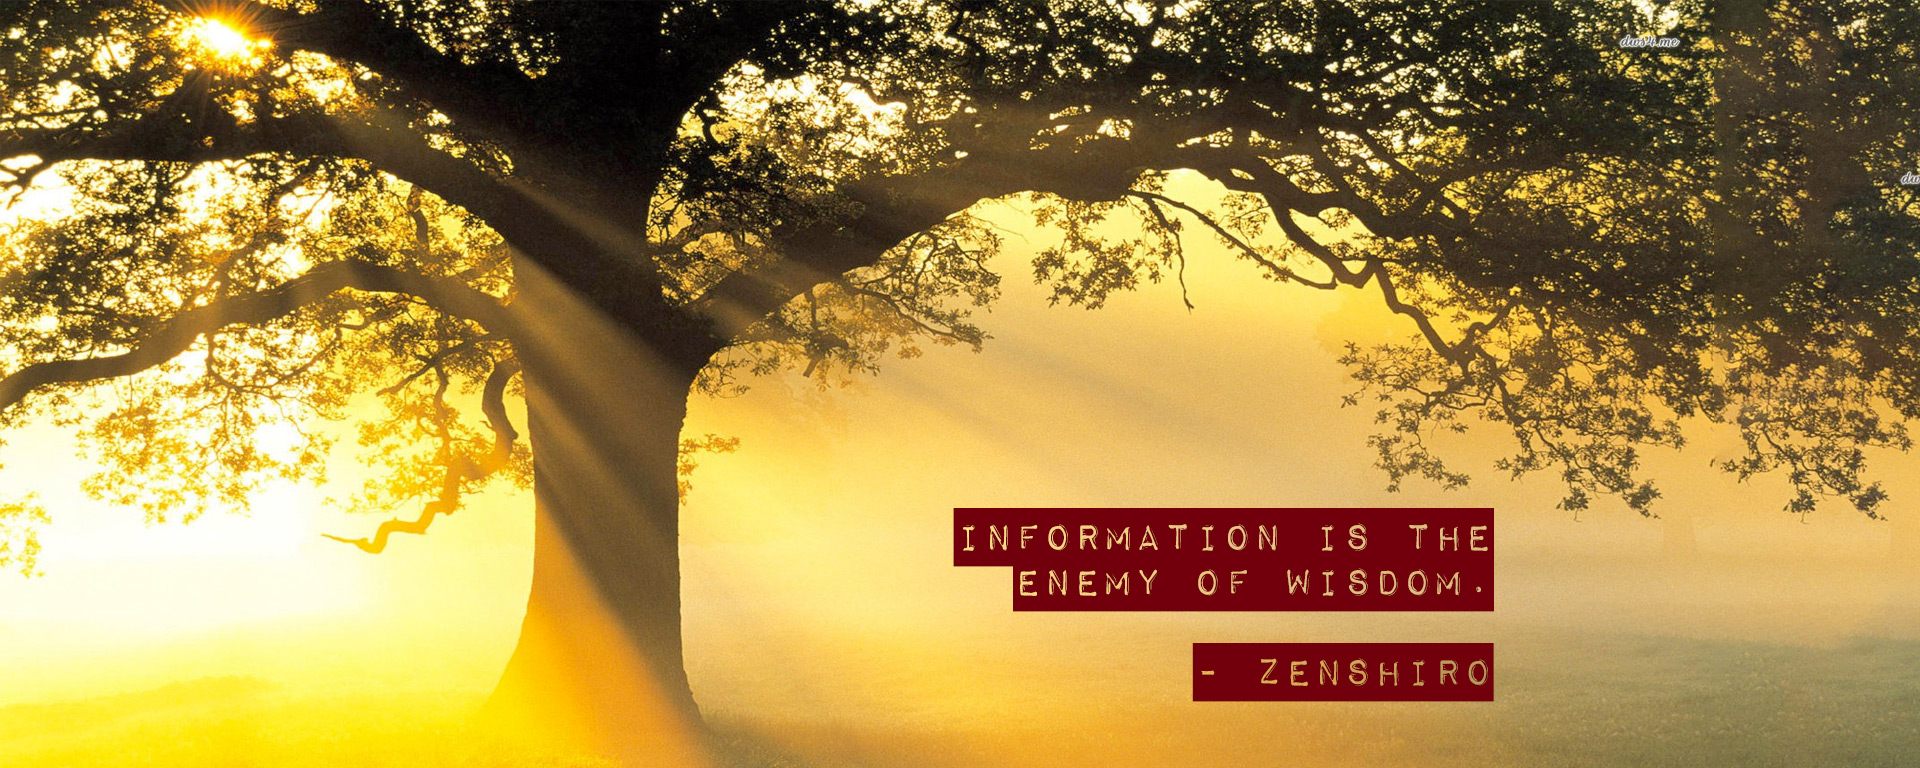 information is the enemy of wisdom